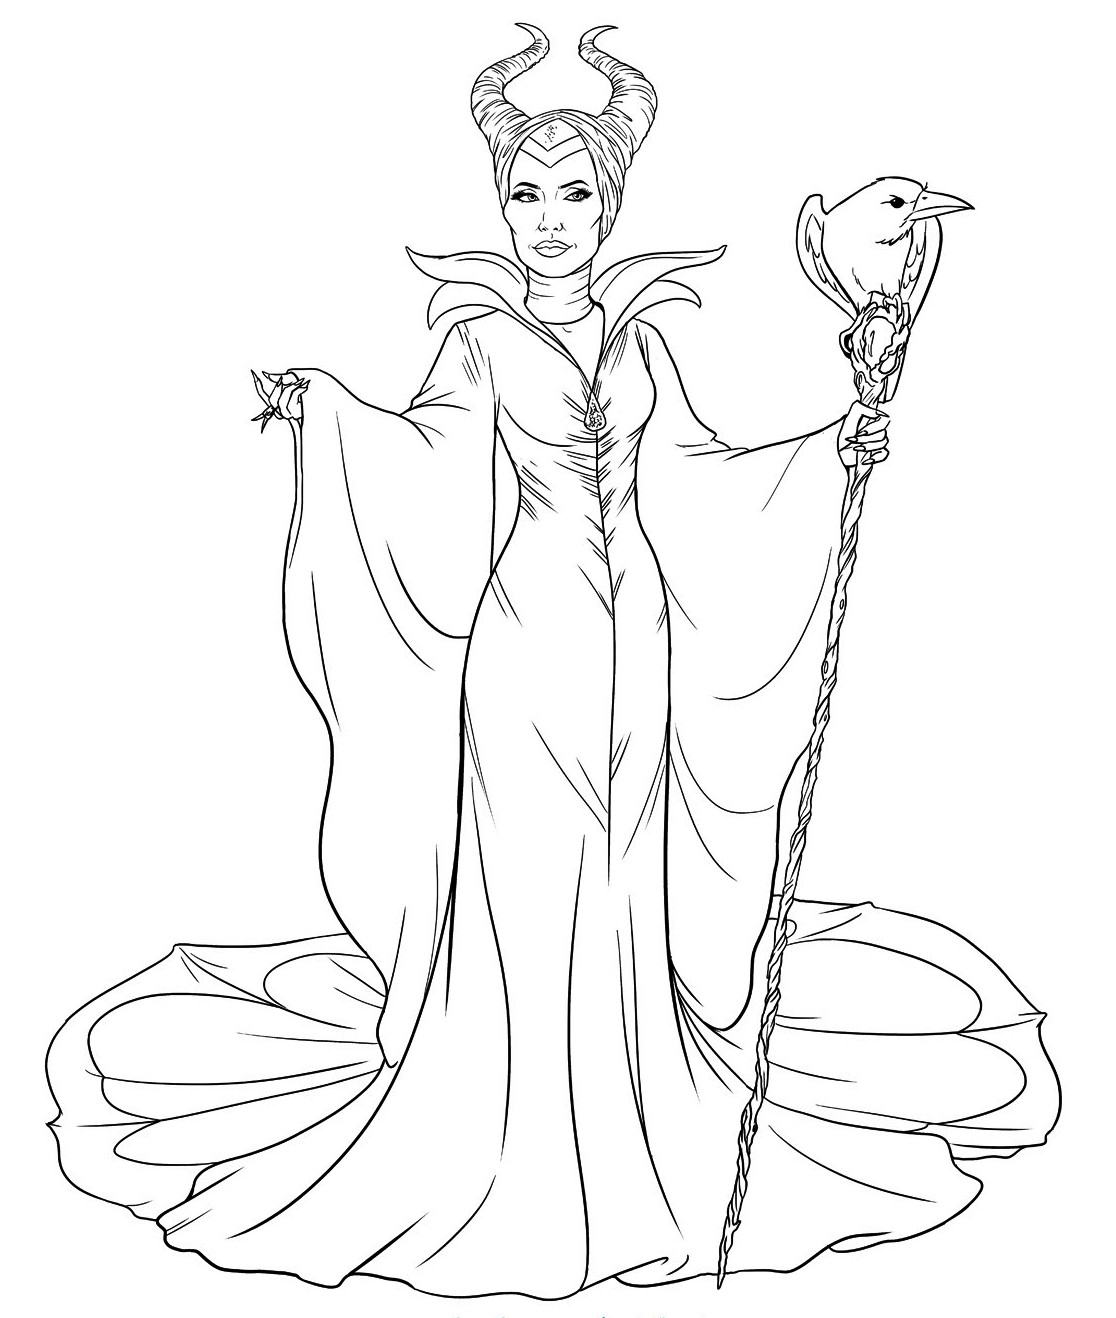 Maleficent Colouring Sheets